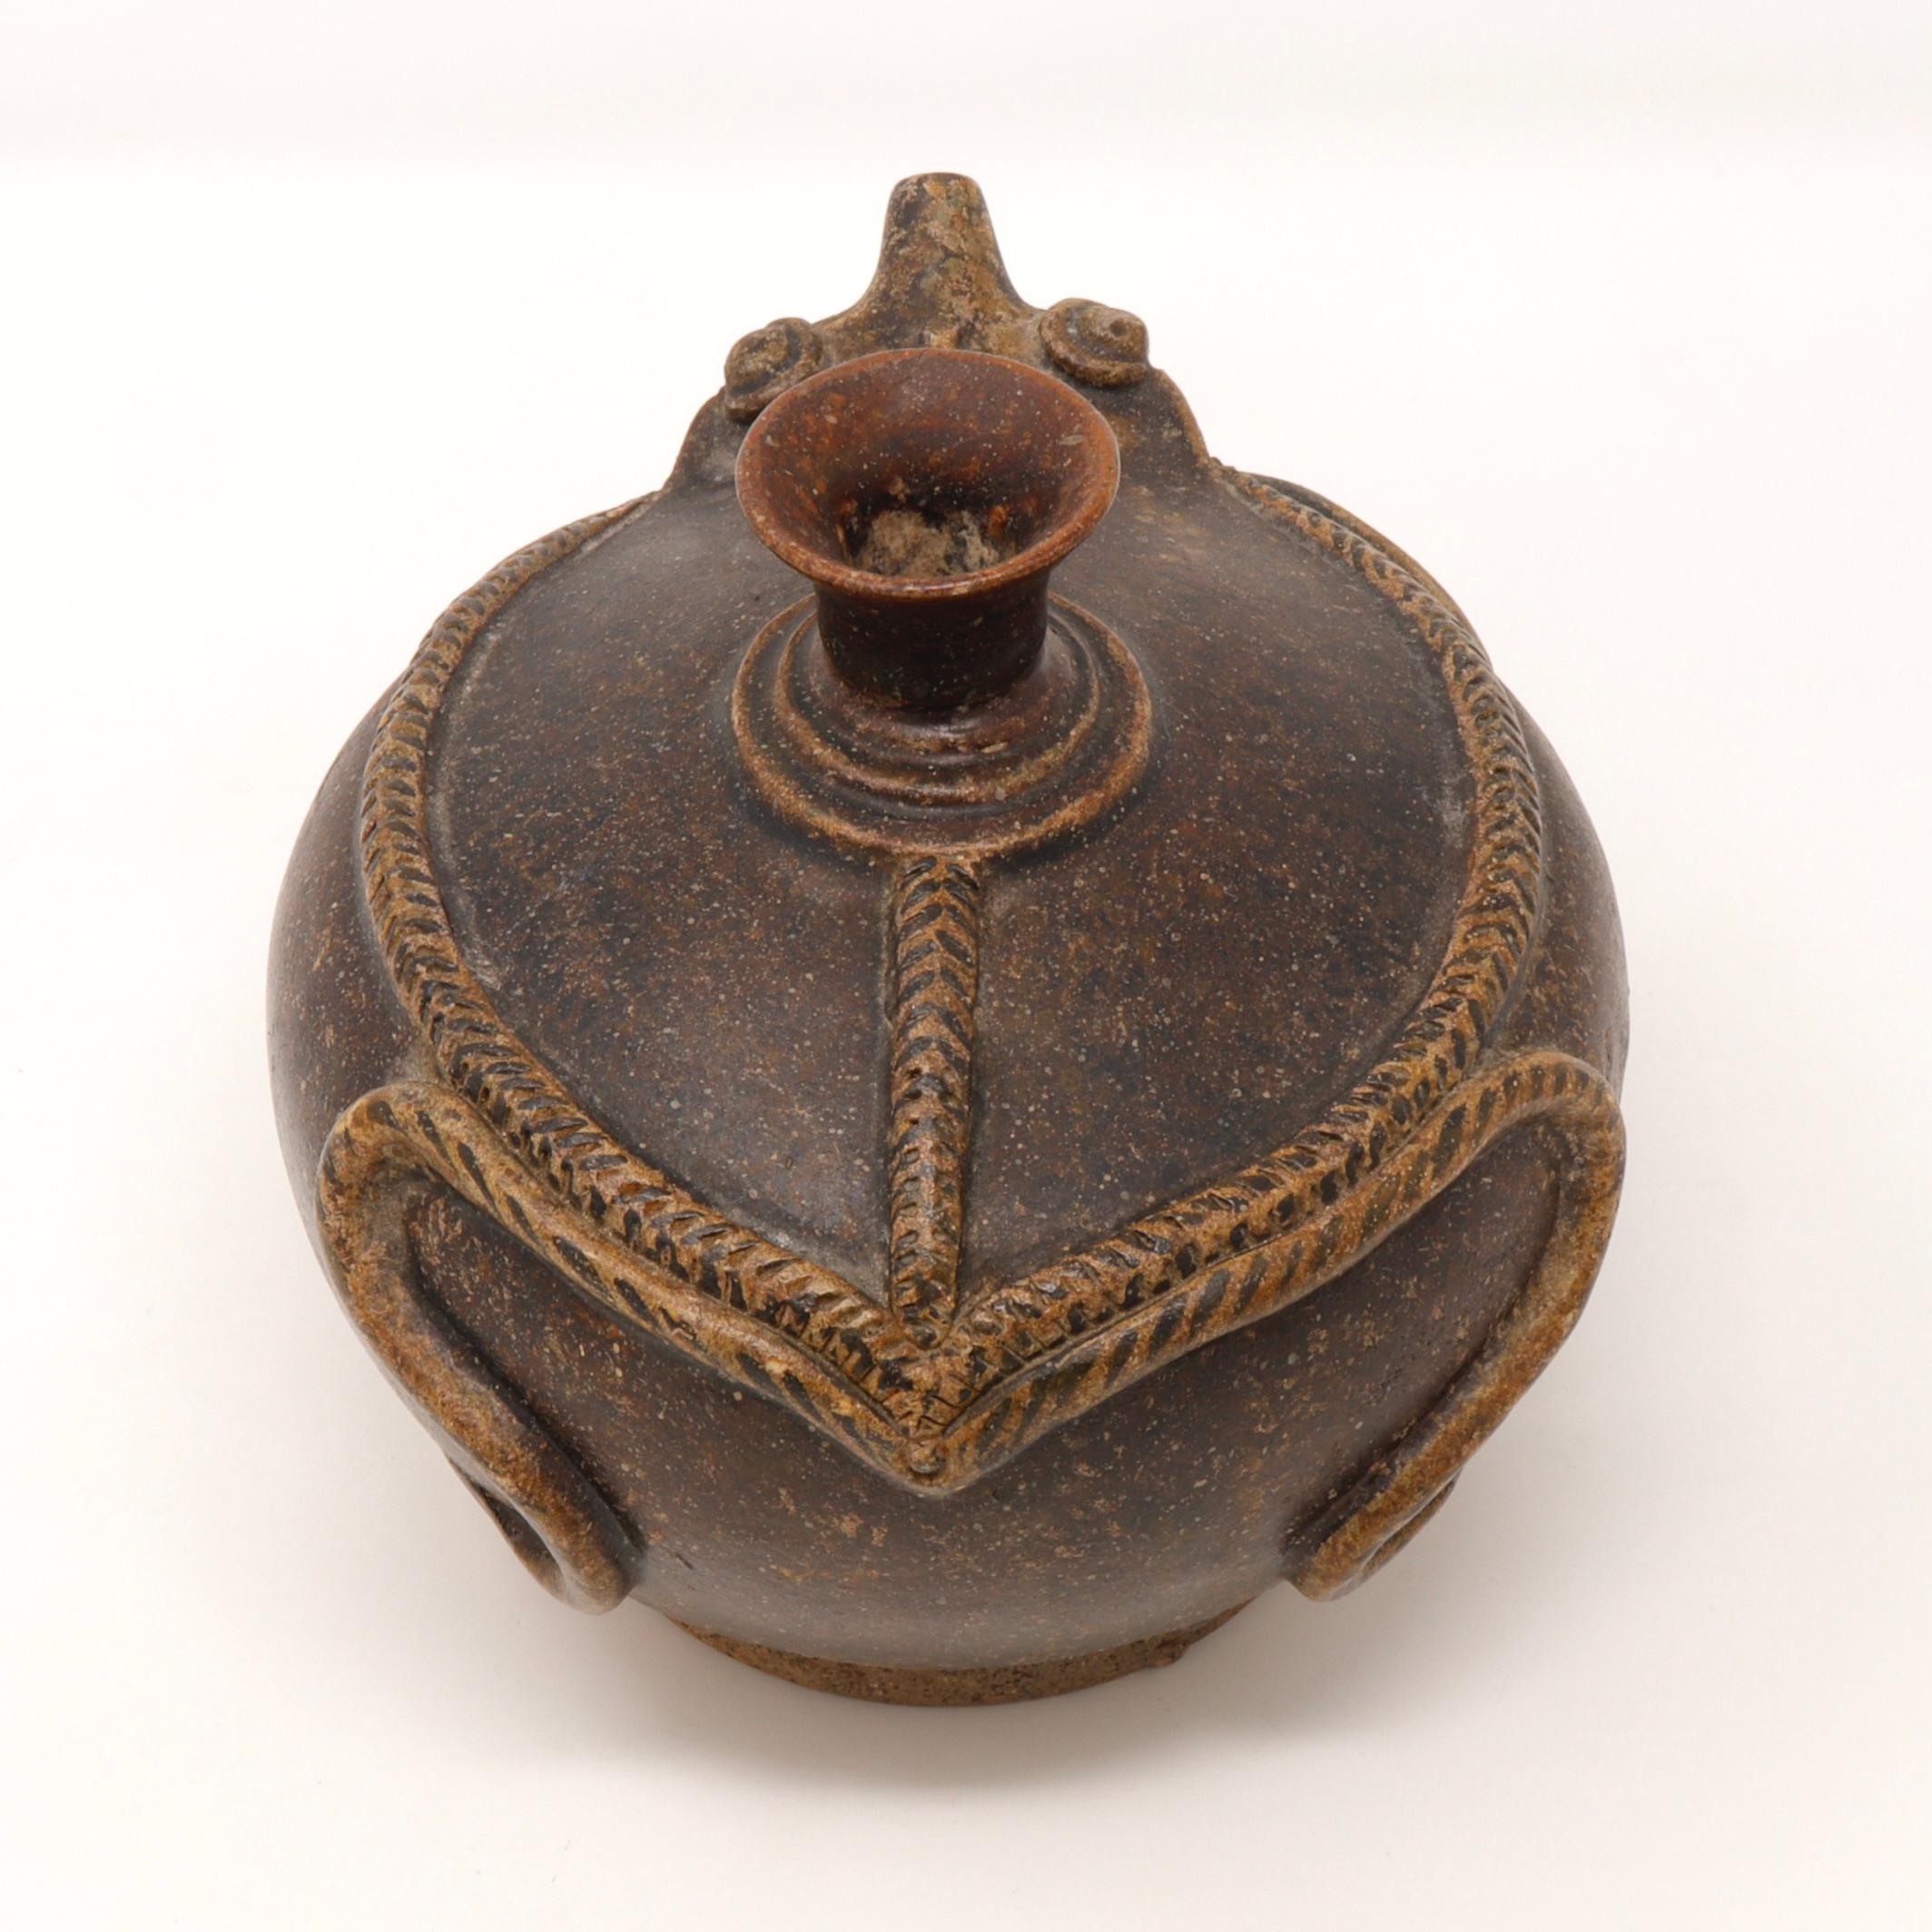 Antique Thai Frog Shaped Kendi, Sawankhalok Kilns, Si Satchanalai. 
A squat globular stoneware body of good size having a narrow upright neck and everted mouth. The short narrow spout has the shape of an imagined frog snout. The modeled details